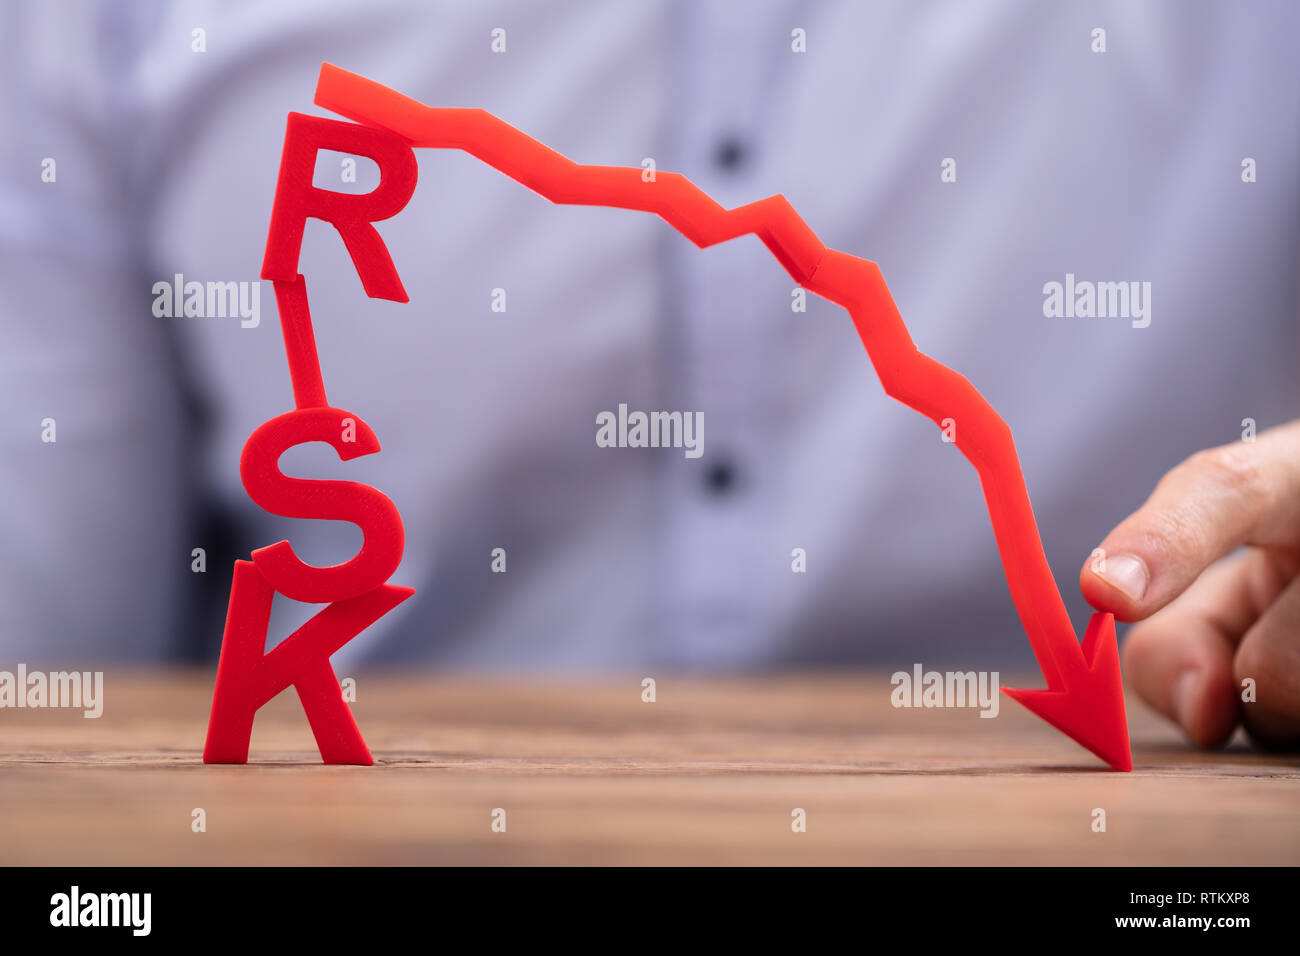 Businessperson Pointing Red Diminishing Arrow Over There Risk Text On Wooden Desk Stock Photo